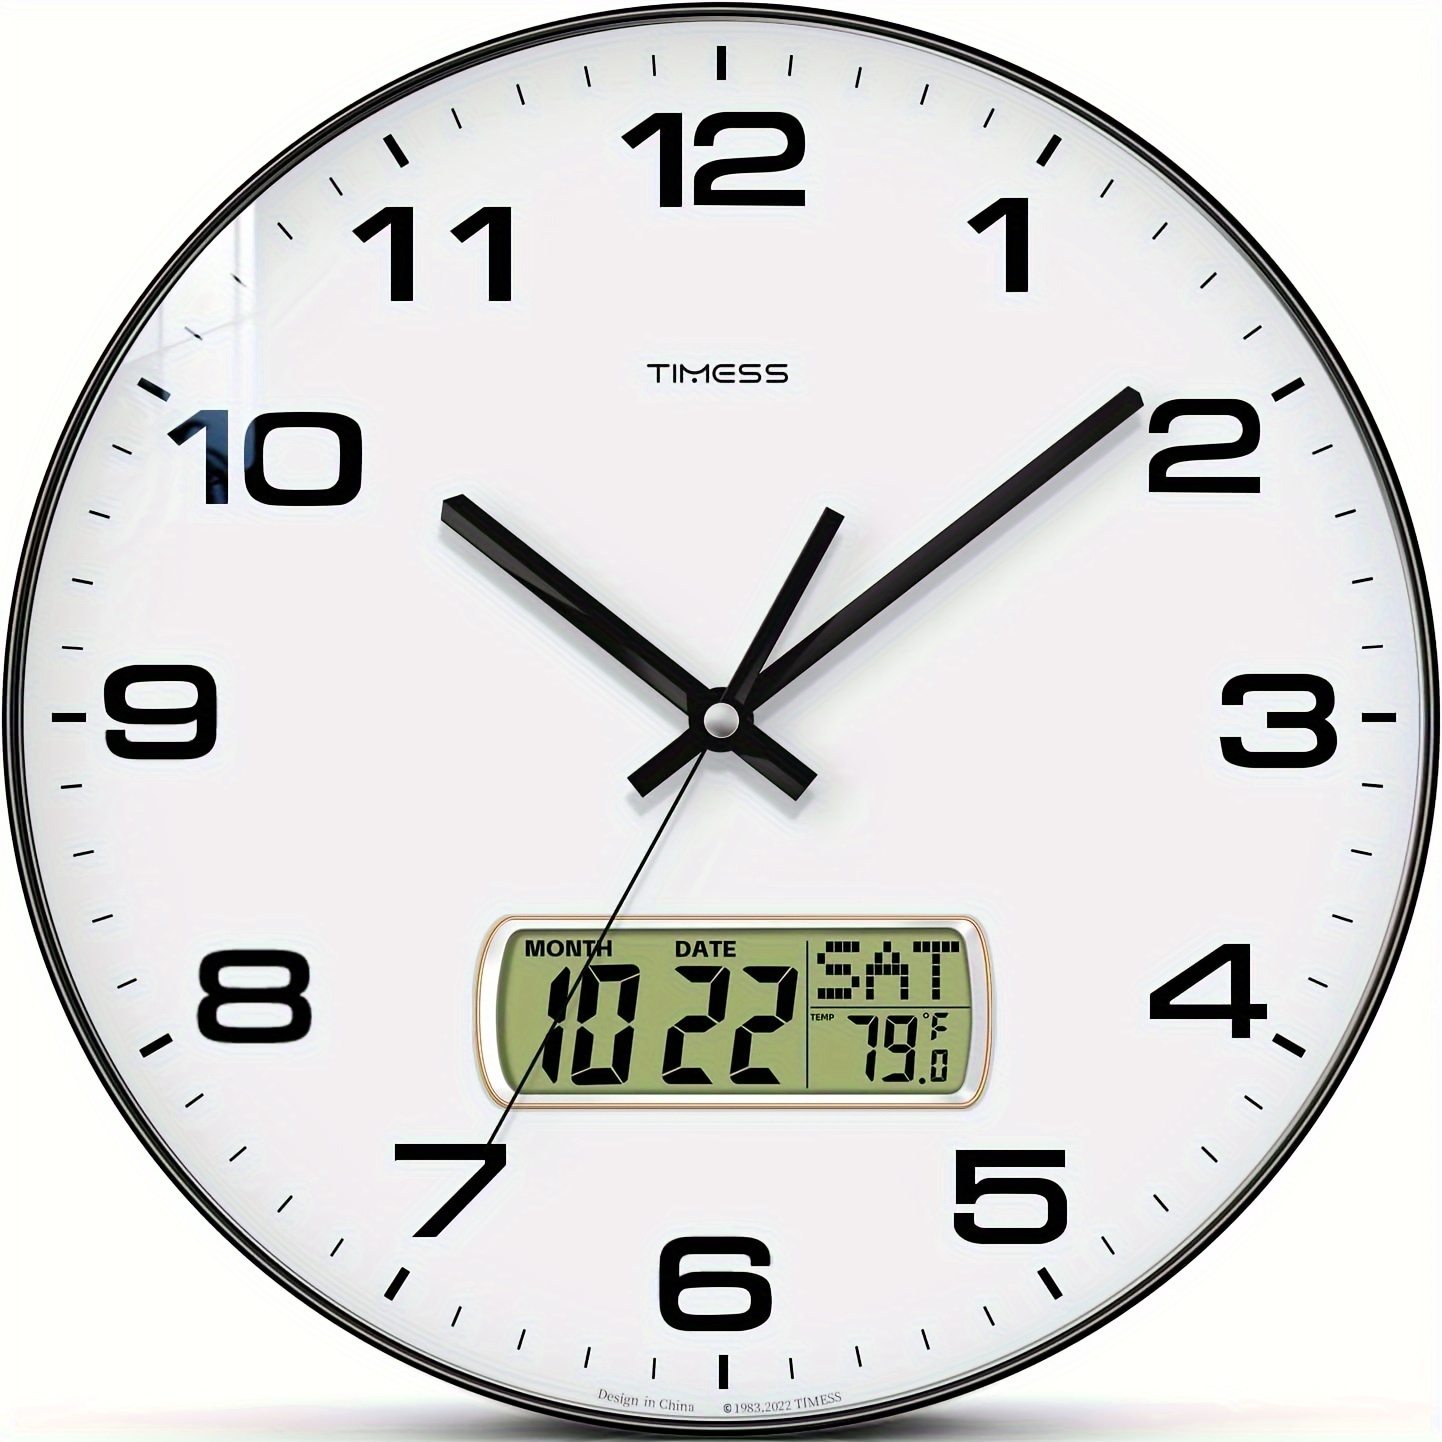 

Timess Calendar Display Analog Wall Clock, 10/12/14 Inch 4-color Large Dial Silent, Can Display Perpetual Calendar And Fahrenheit Temperature, Bedroom, Office, School Decoration